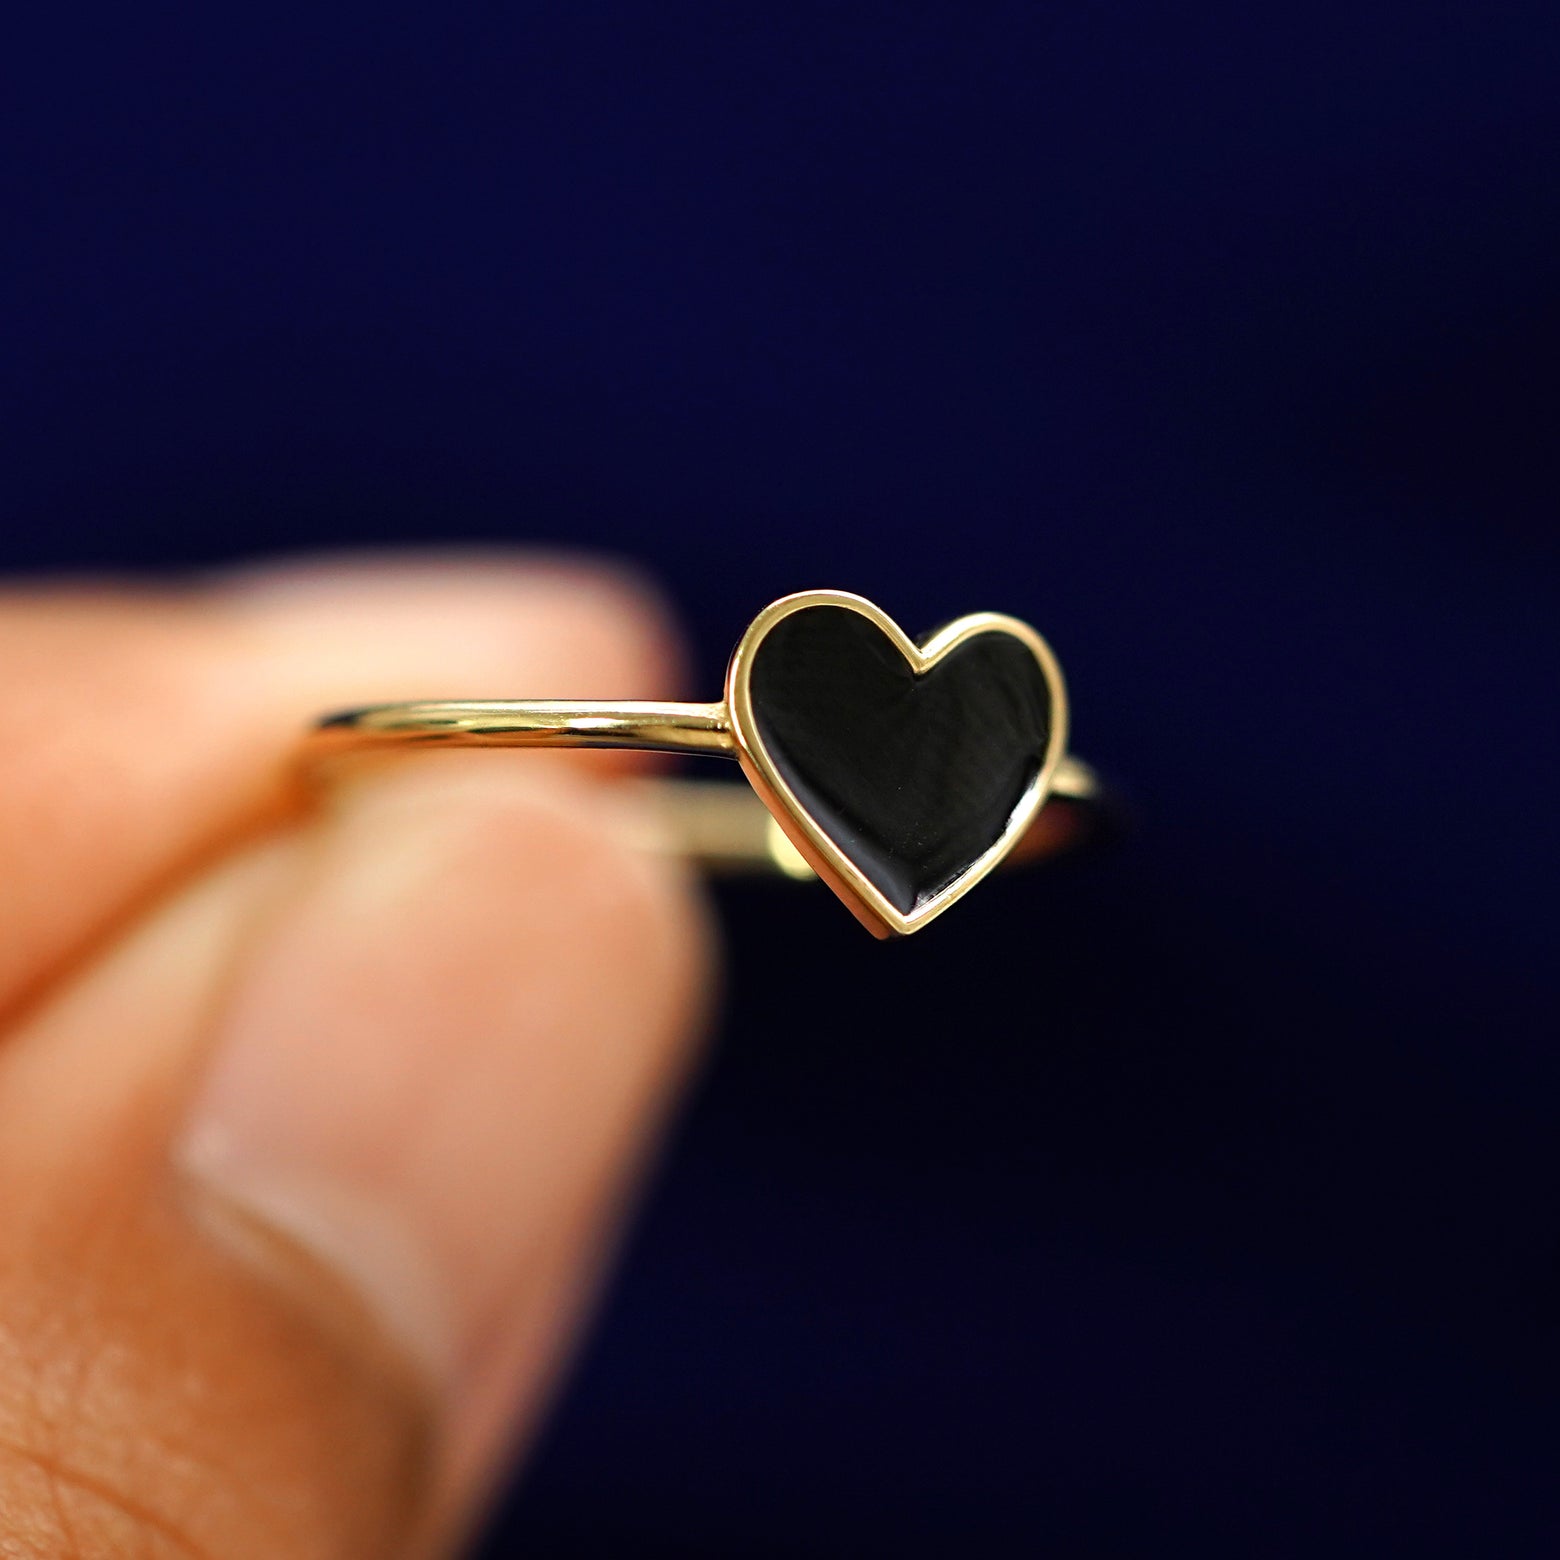 A model holding a Enamel Heart Ring tilted to show the side of the ring